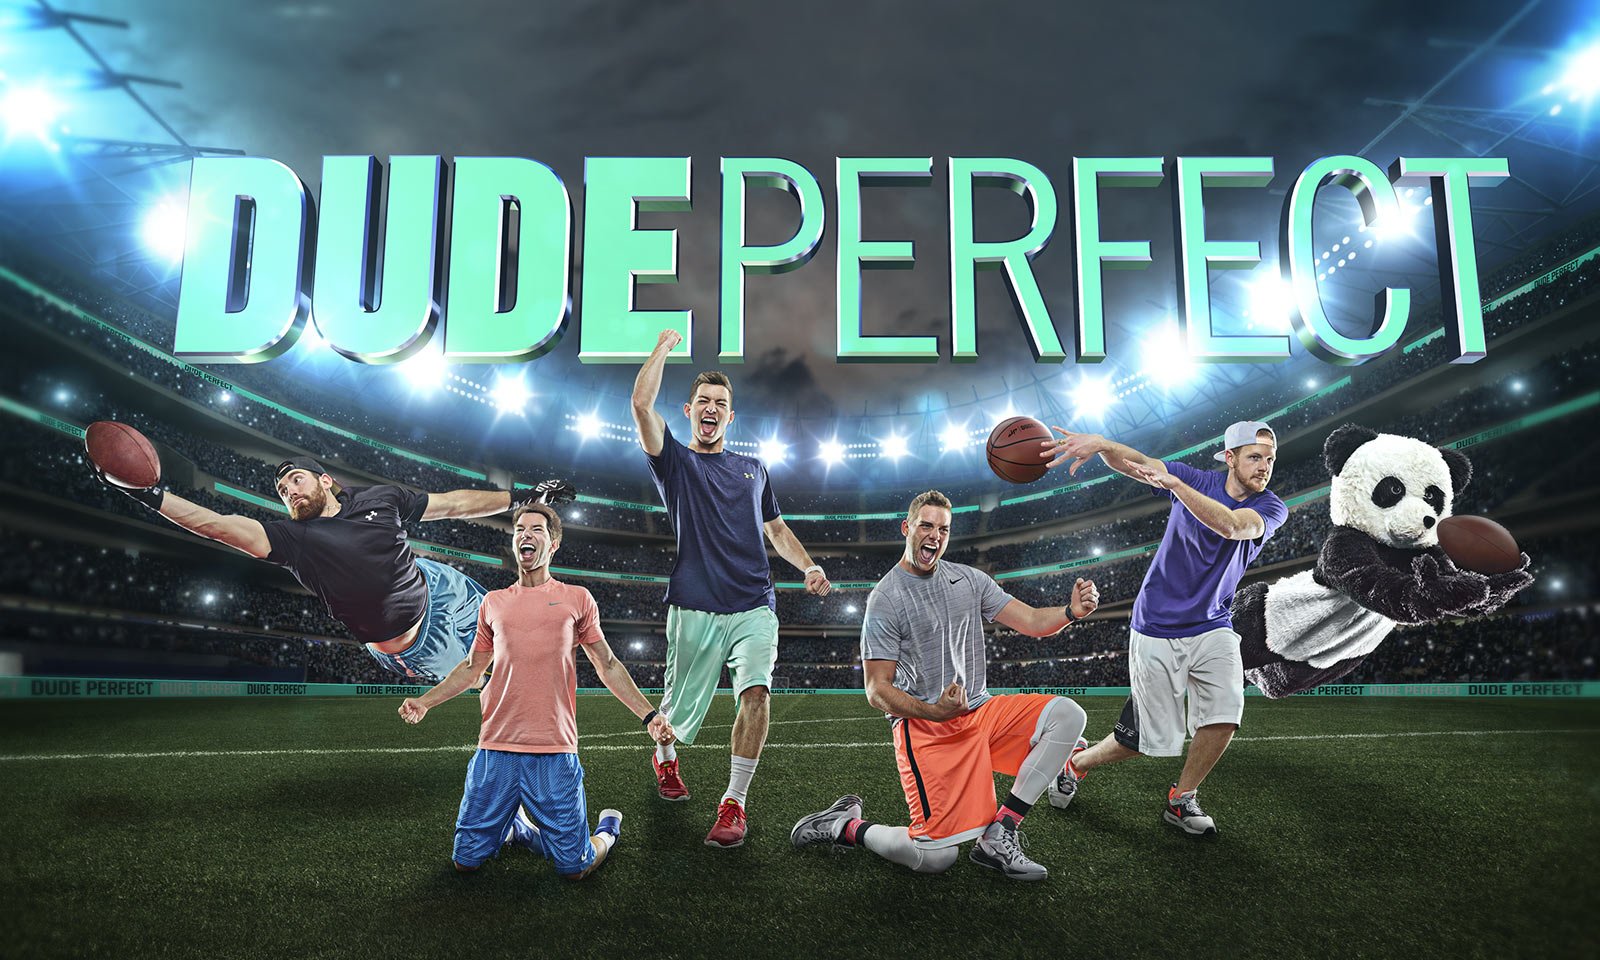 CMT to launch The Dude Perfect Show with trick shots and sports comedy